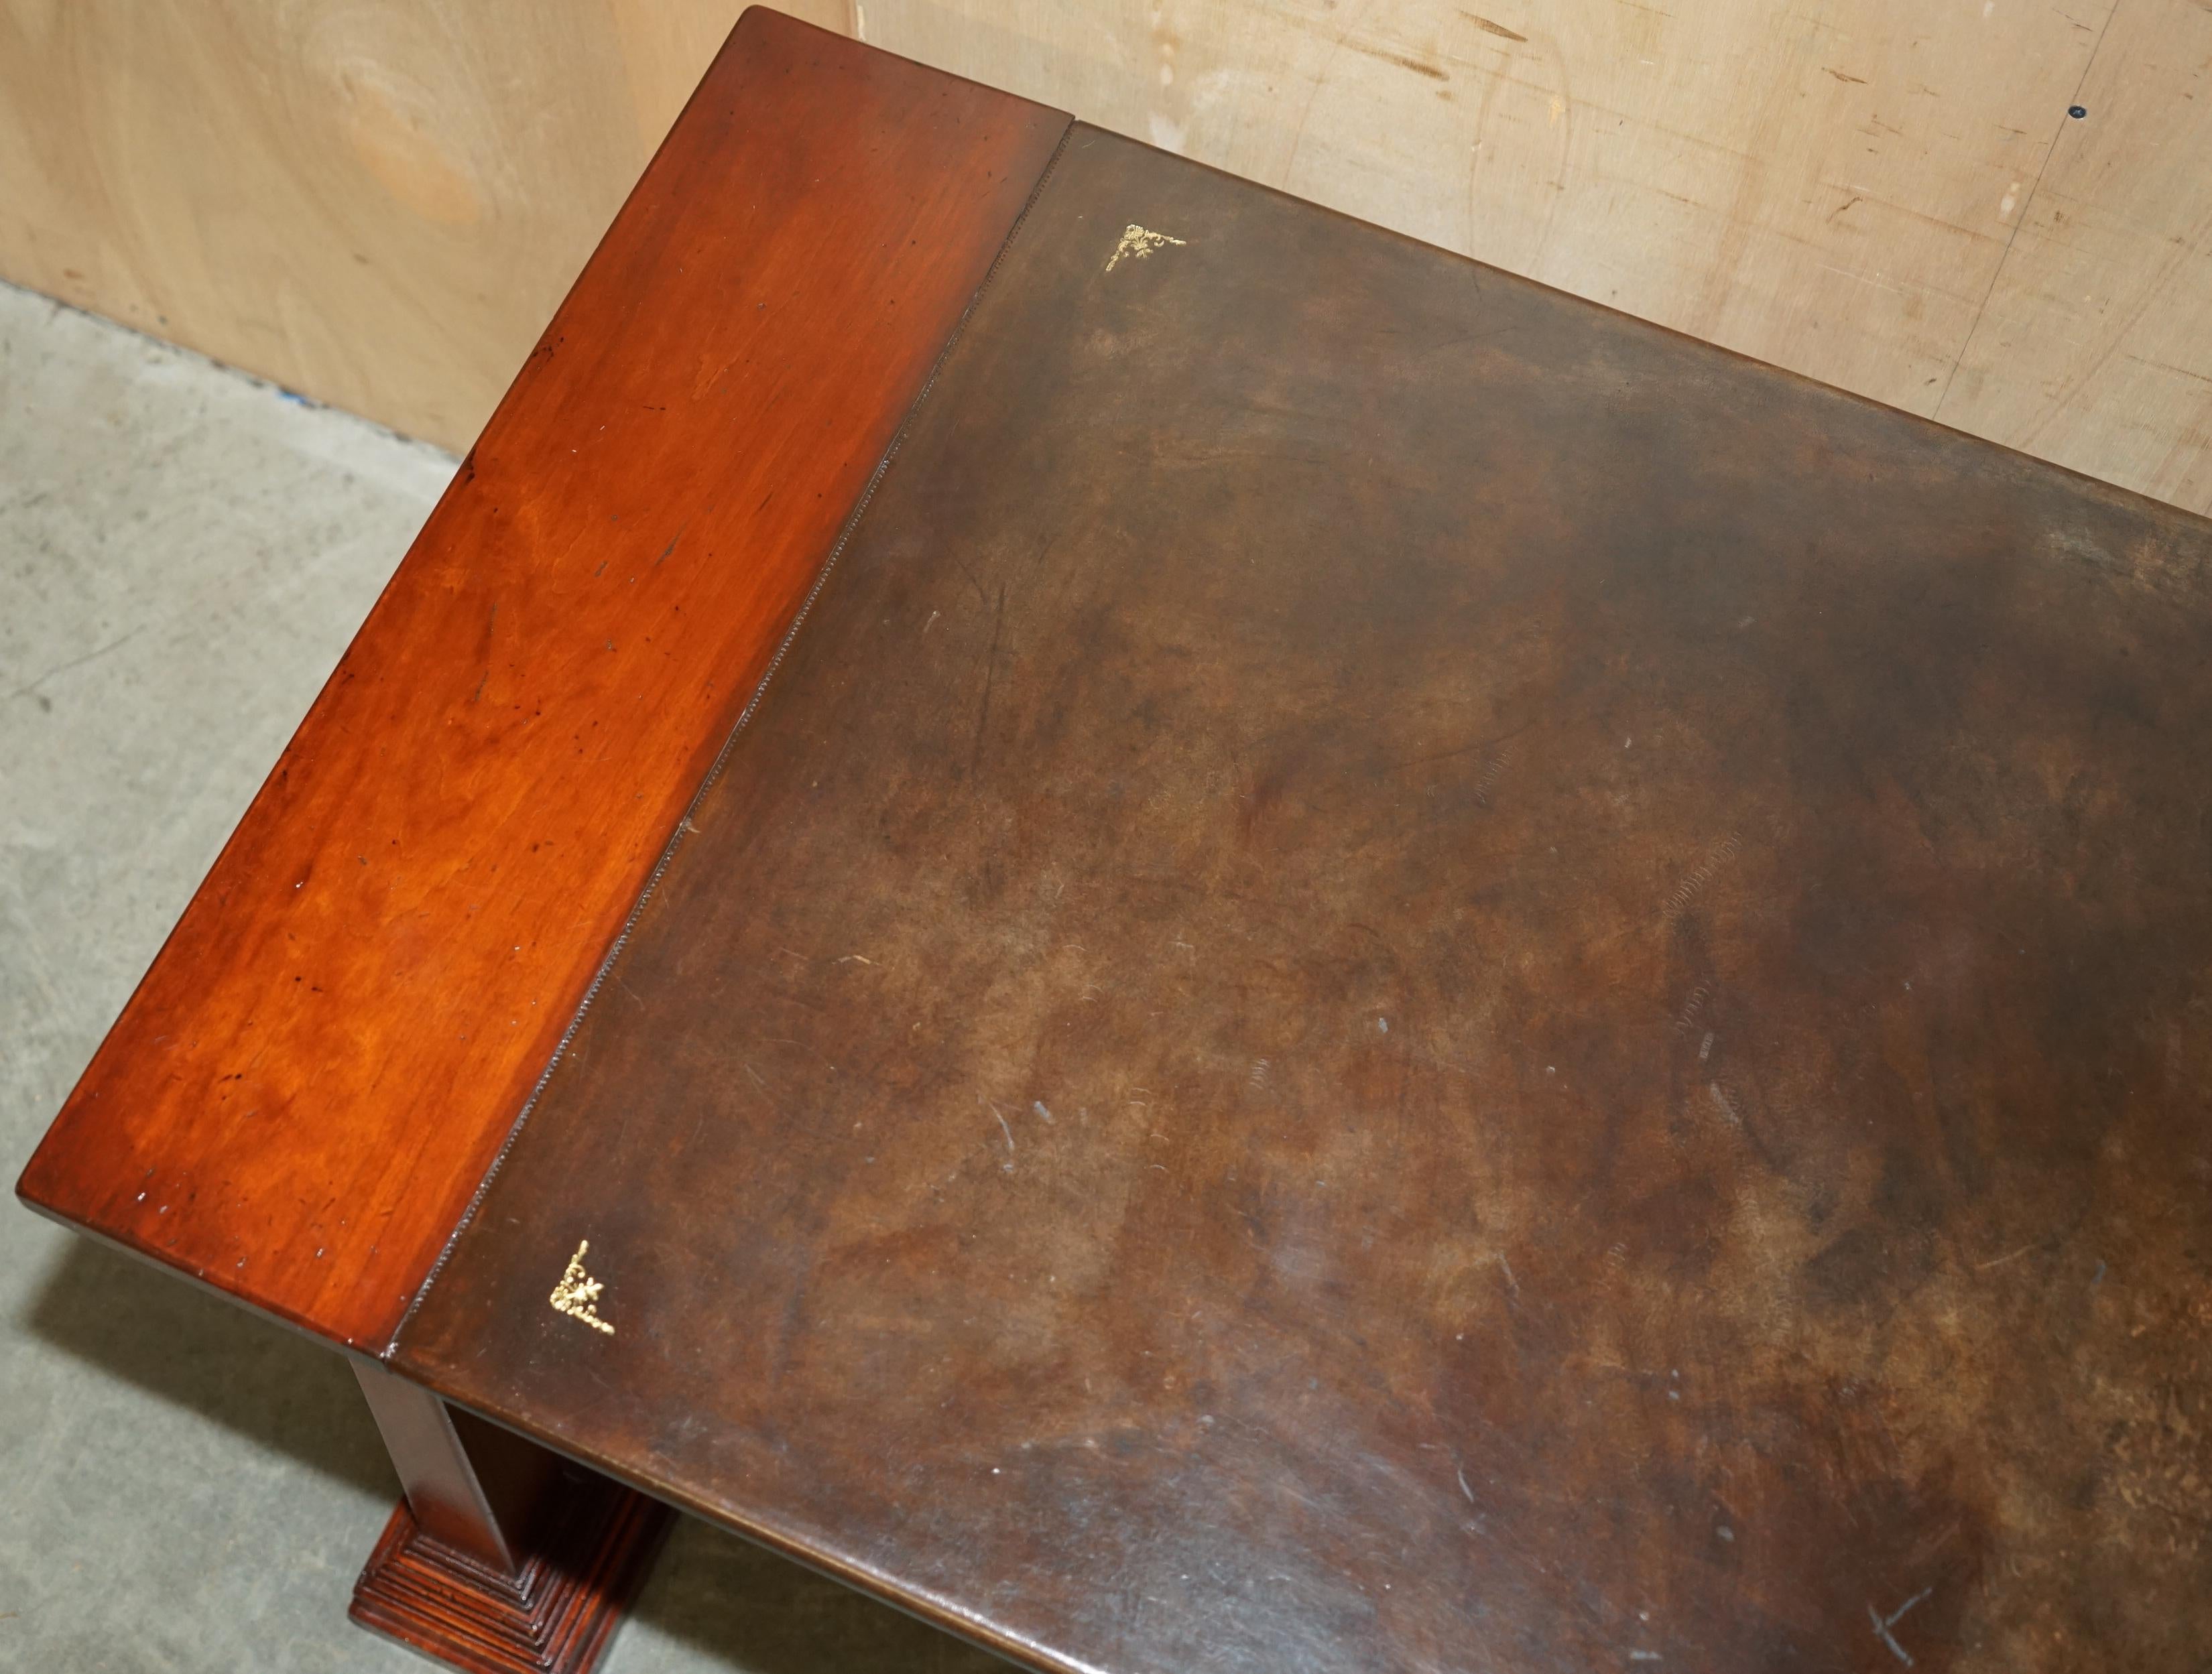 Hand-Crafted VINTAGE HARRODS KENNEDY BROWN LEATHER ARITECTURAL WRiTING TABLE OR DESK For Sale